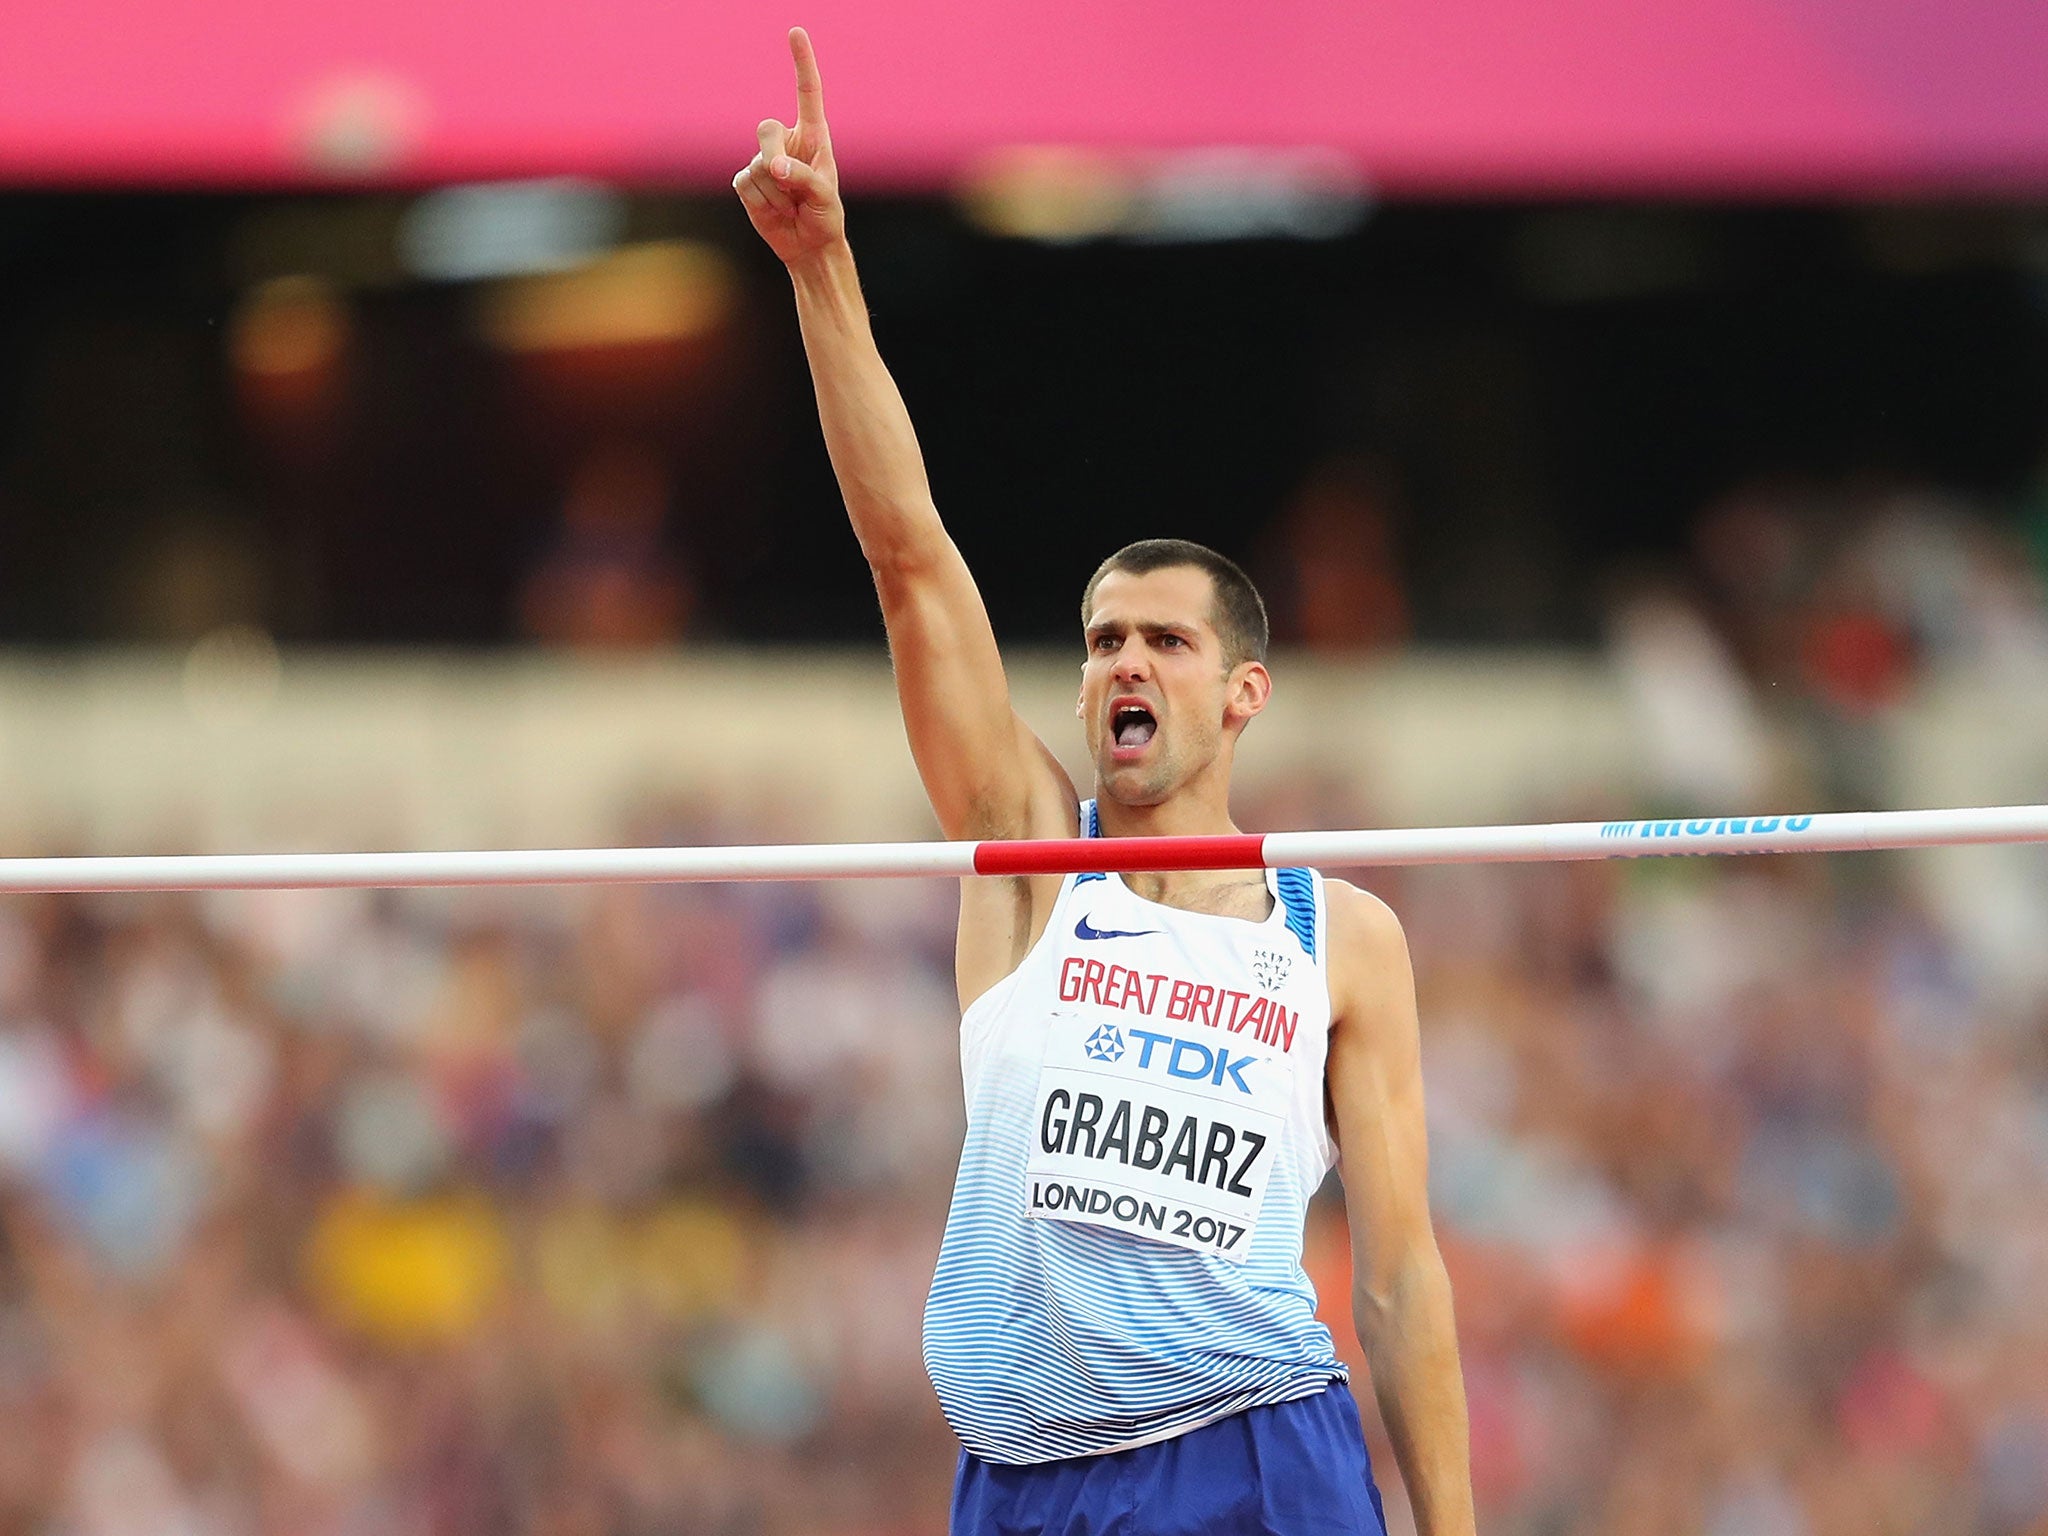 Grabarz in action at last summer's World Athletics Championships in London